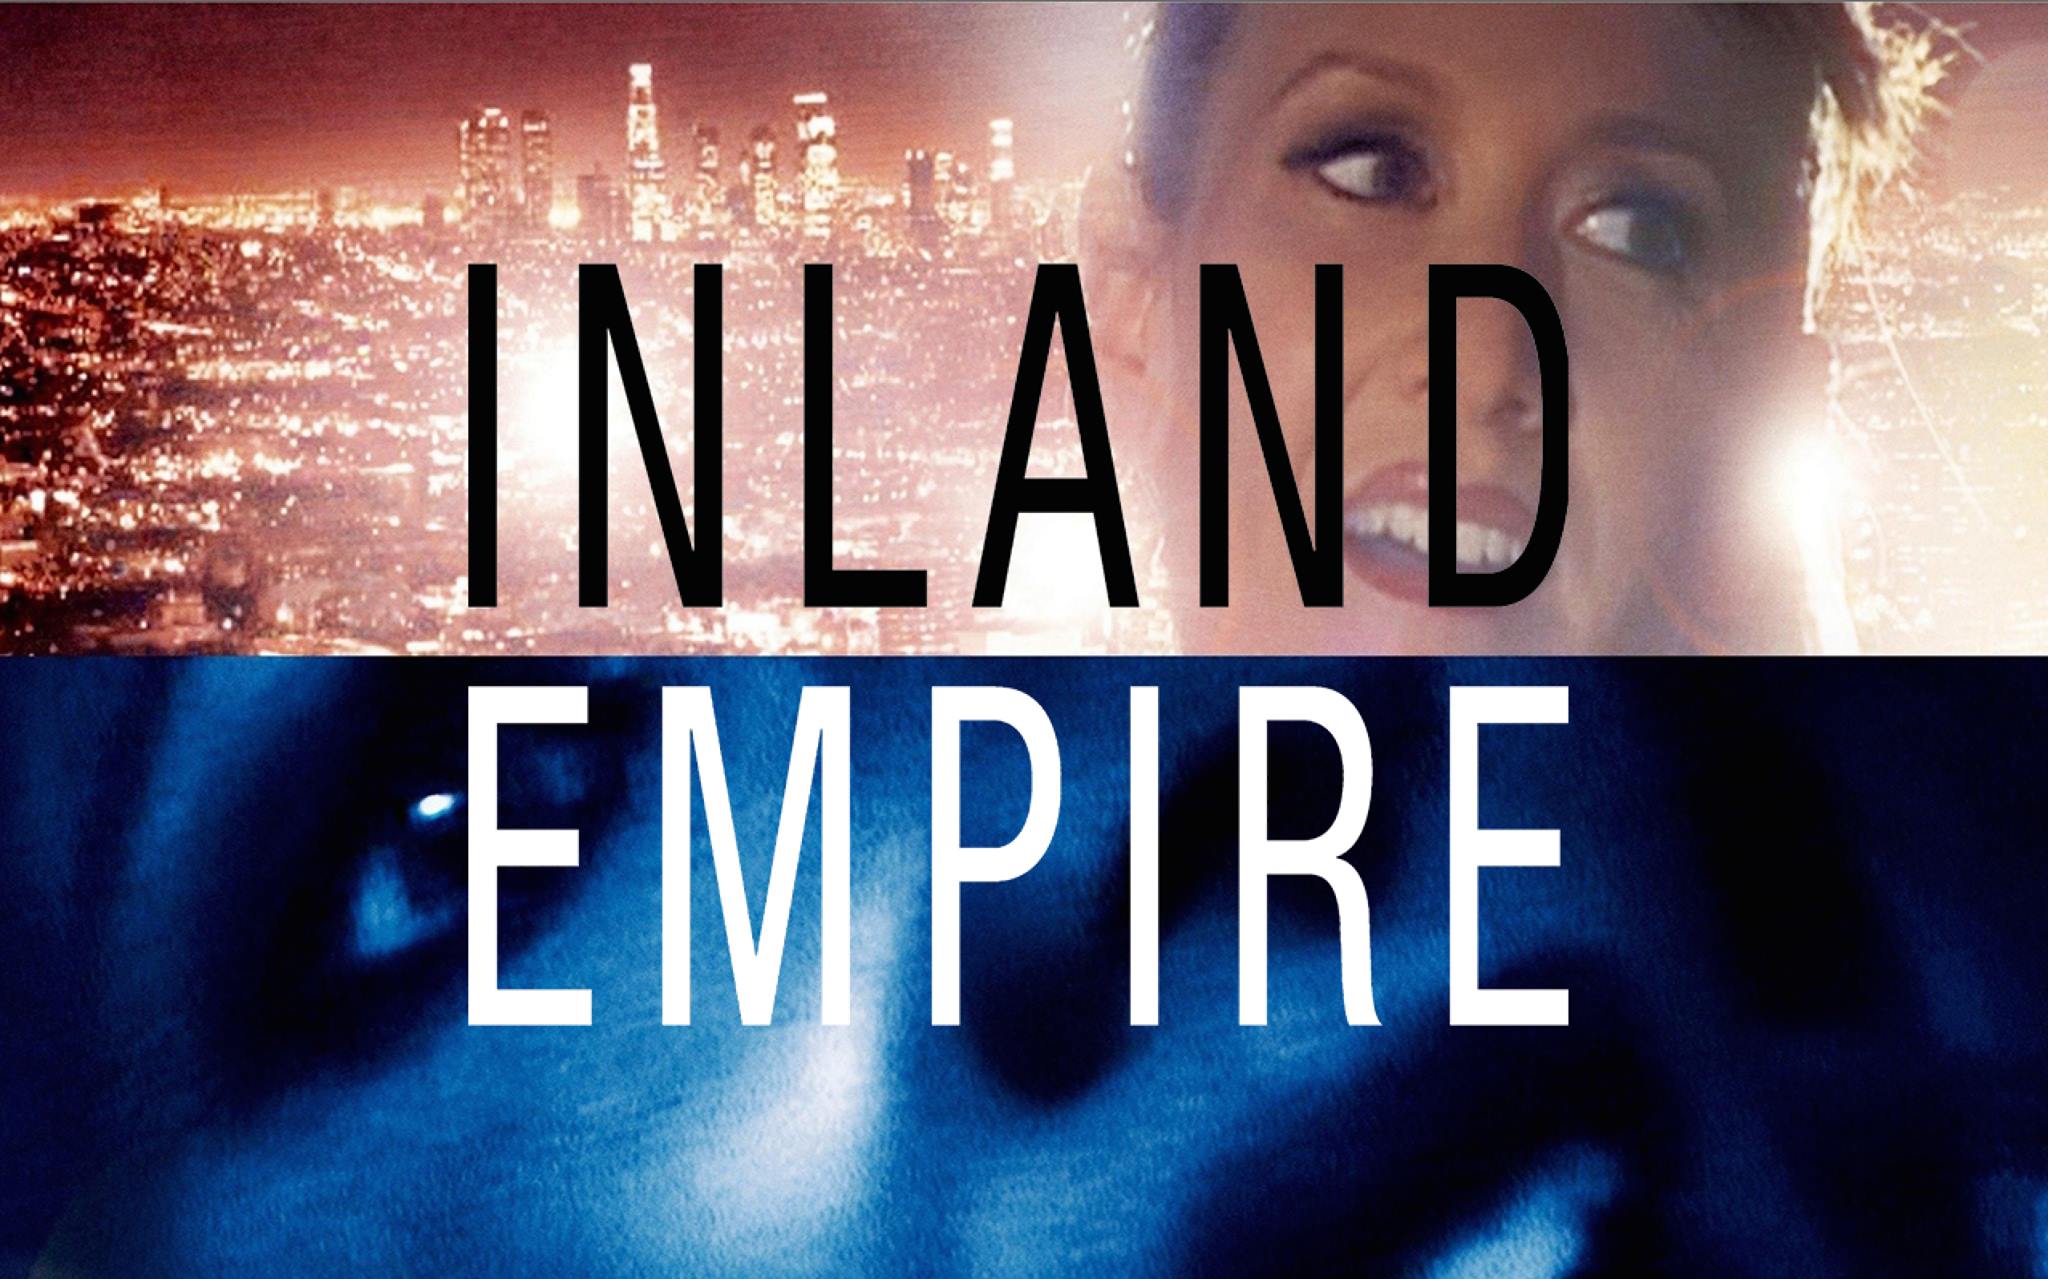 36 Facts about the movie Inland Empire - Facts.net